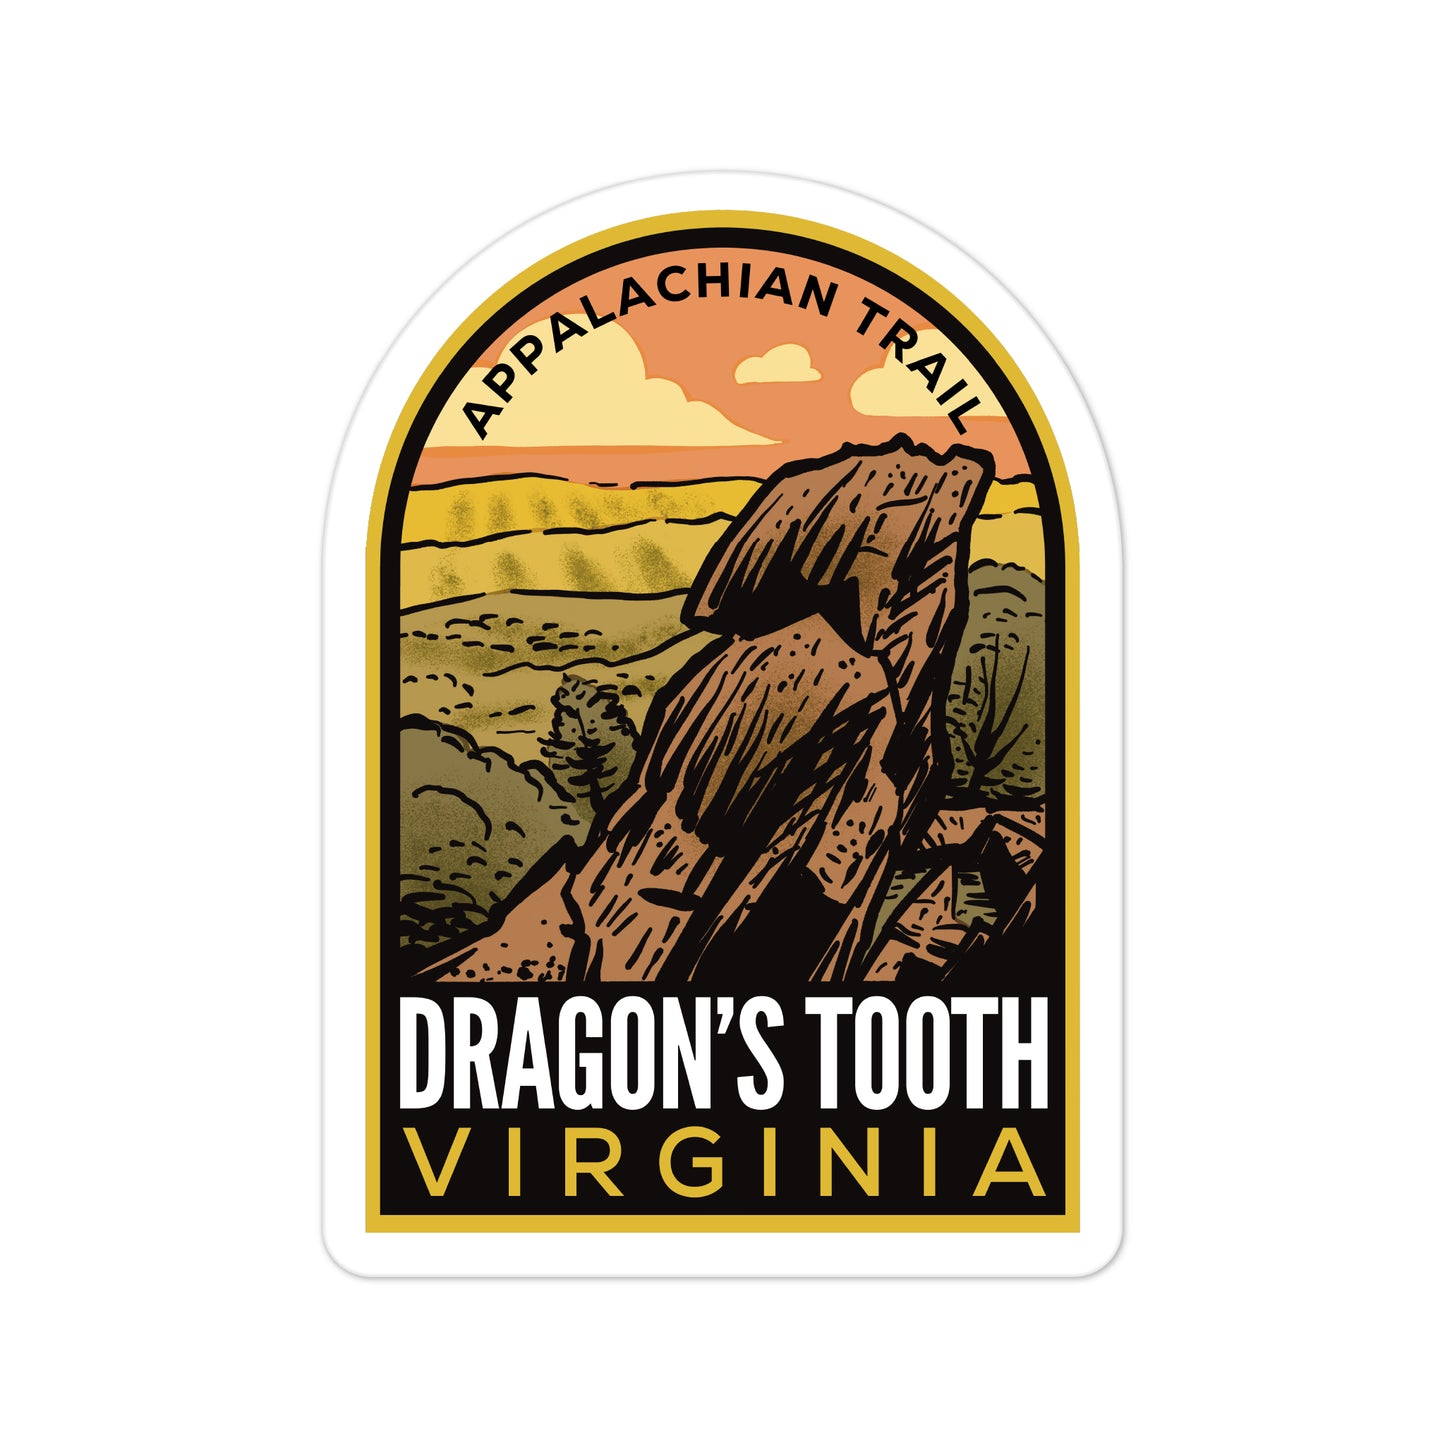 A sticker of Dragons Tooth VA